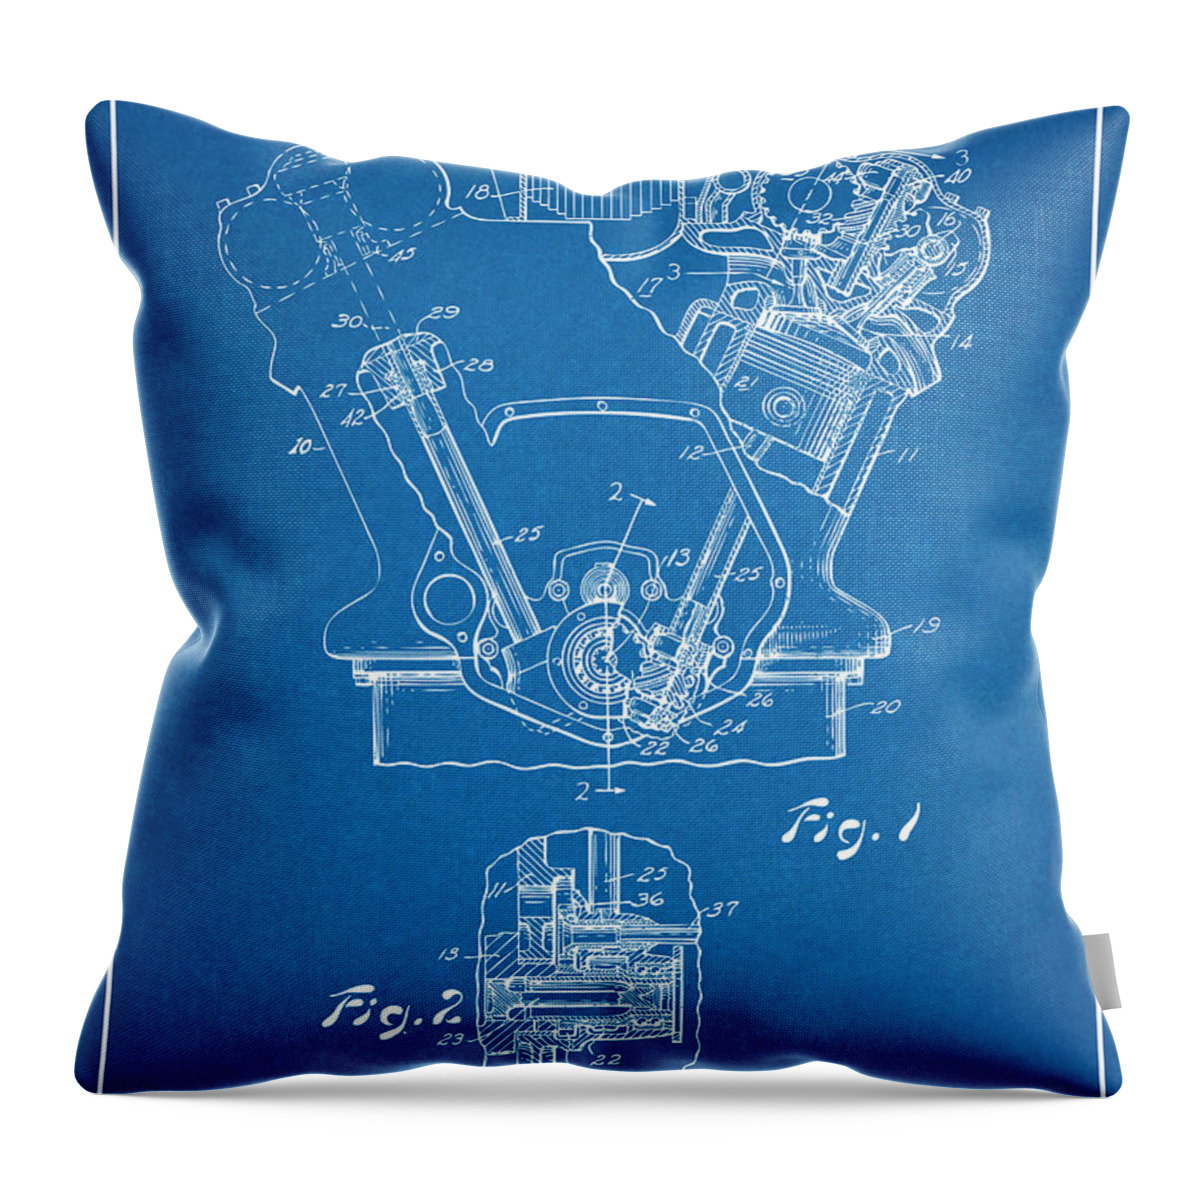 Henry Ford Throw Pillow featuring the drawing 1942 Henry Ford Internal Combustion Engine Patent Print Blueprint by Greg Edwards